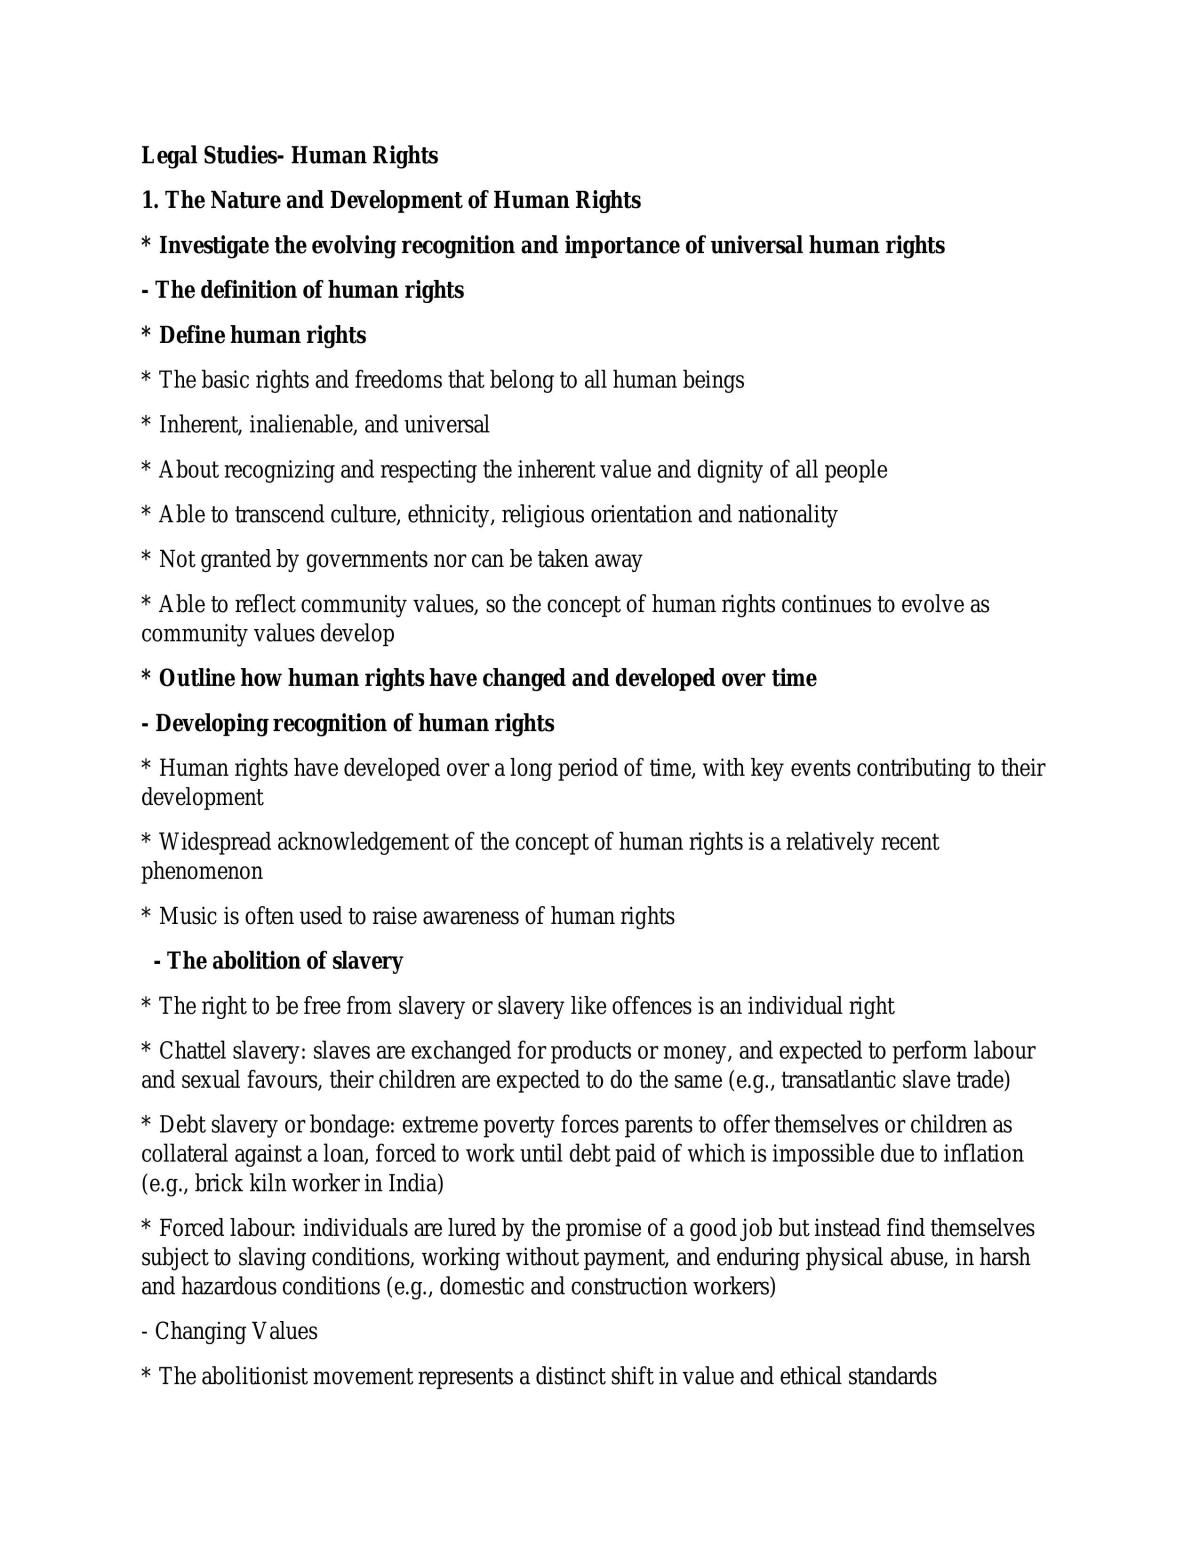 Human rights  - Page 1